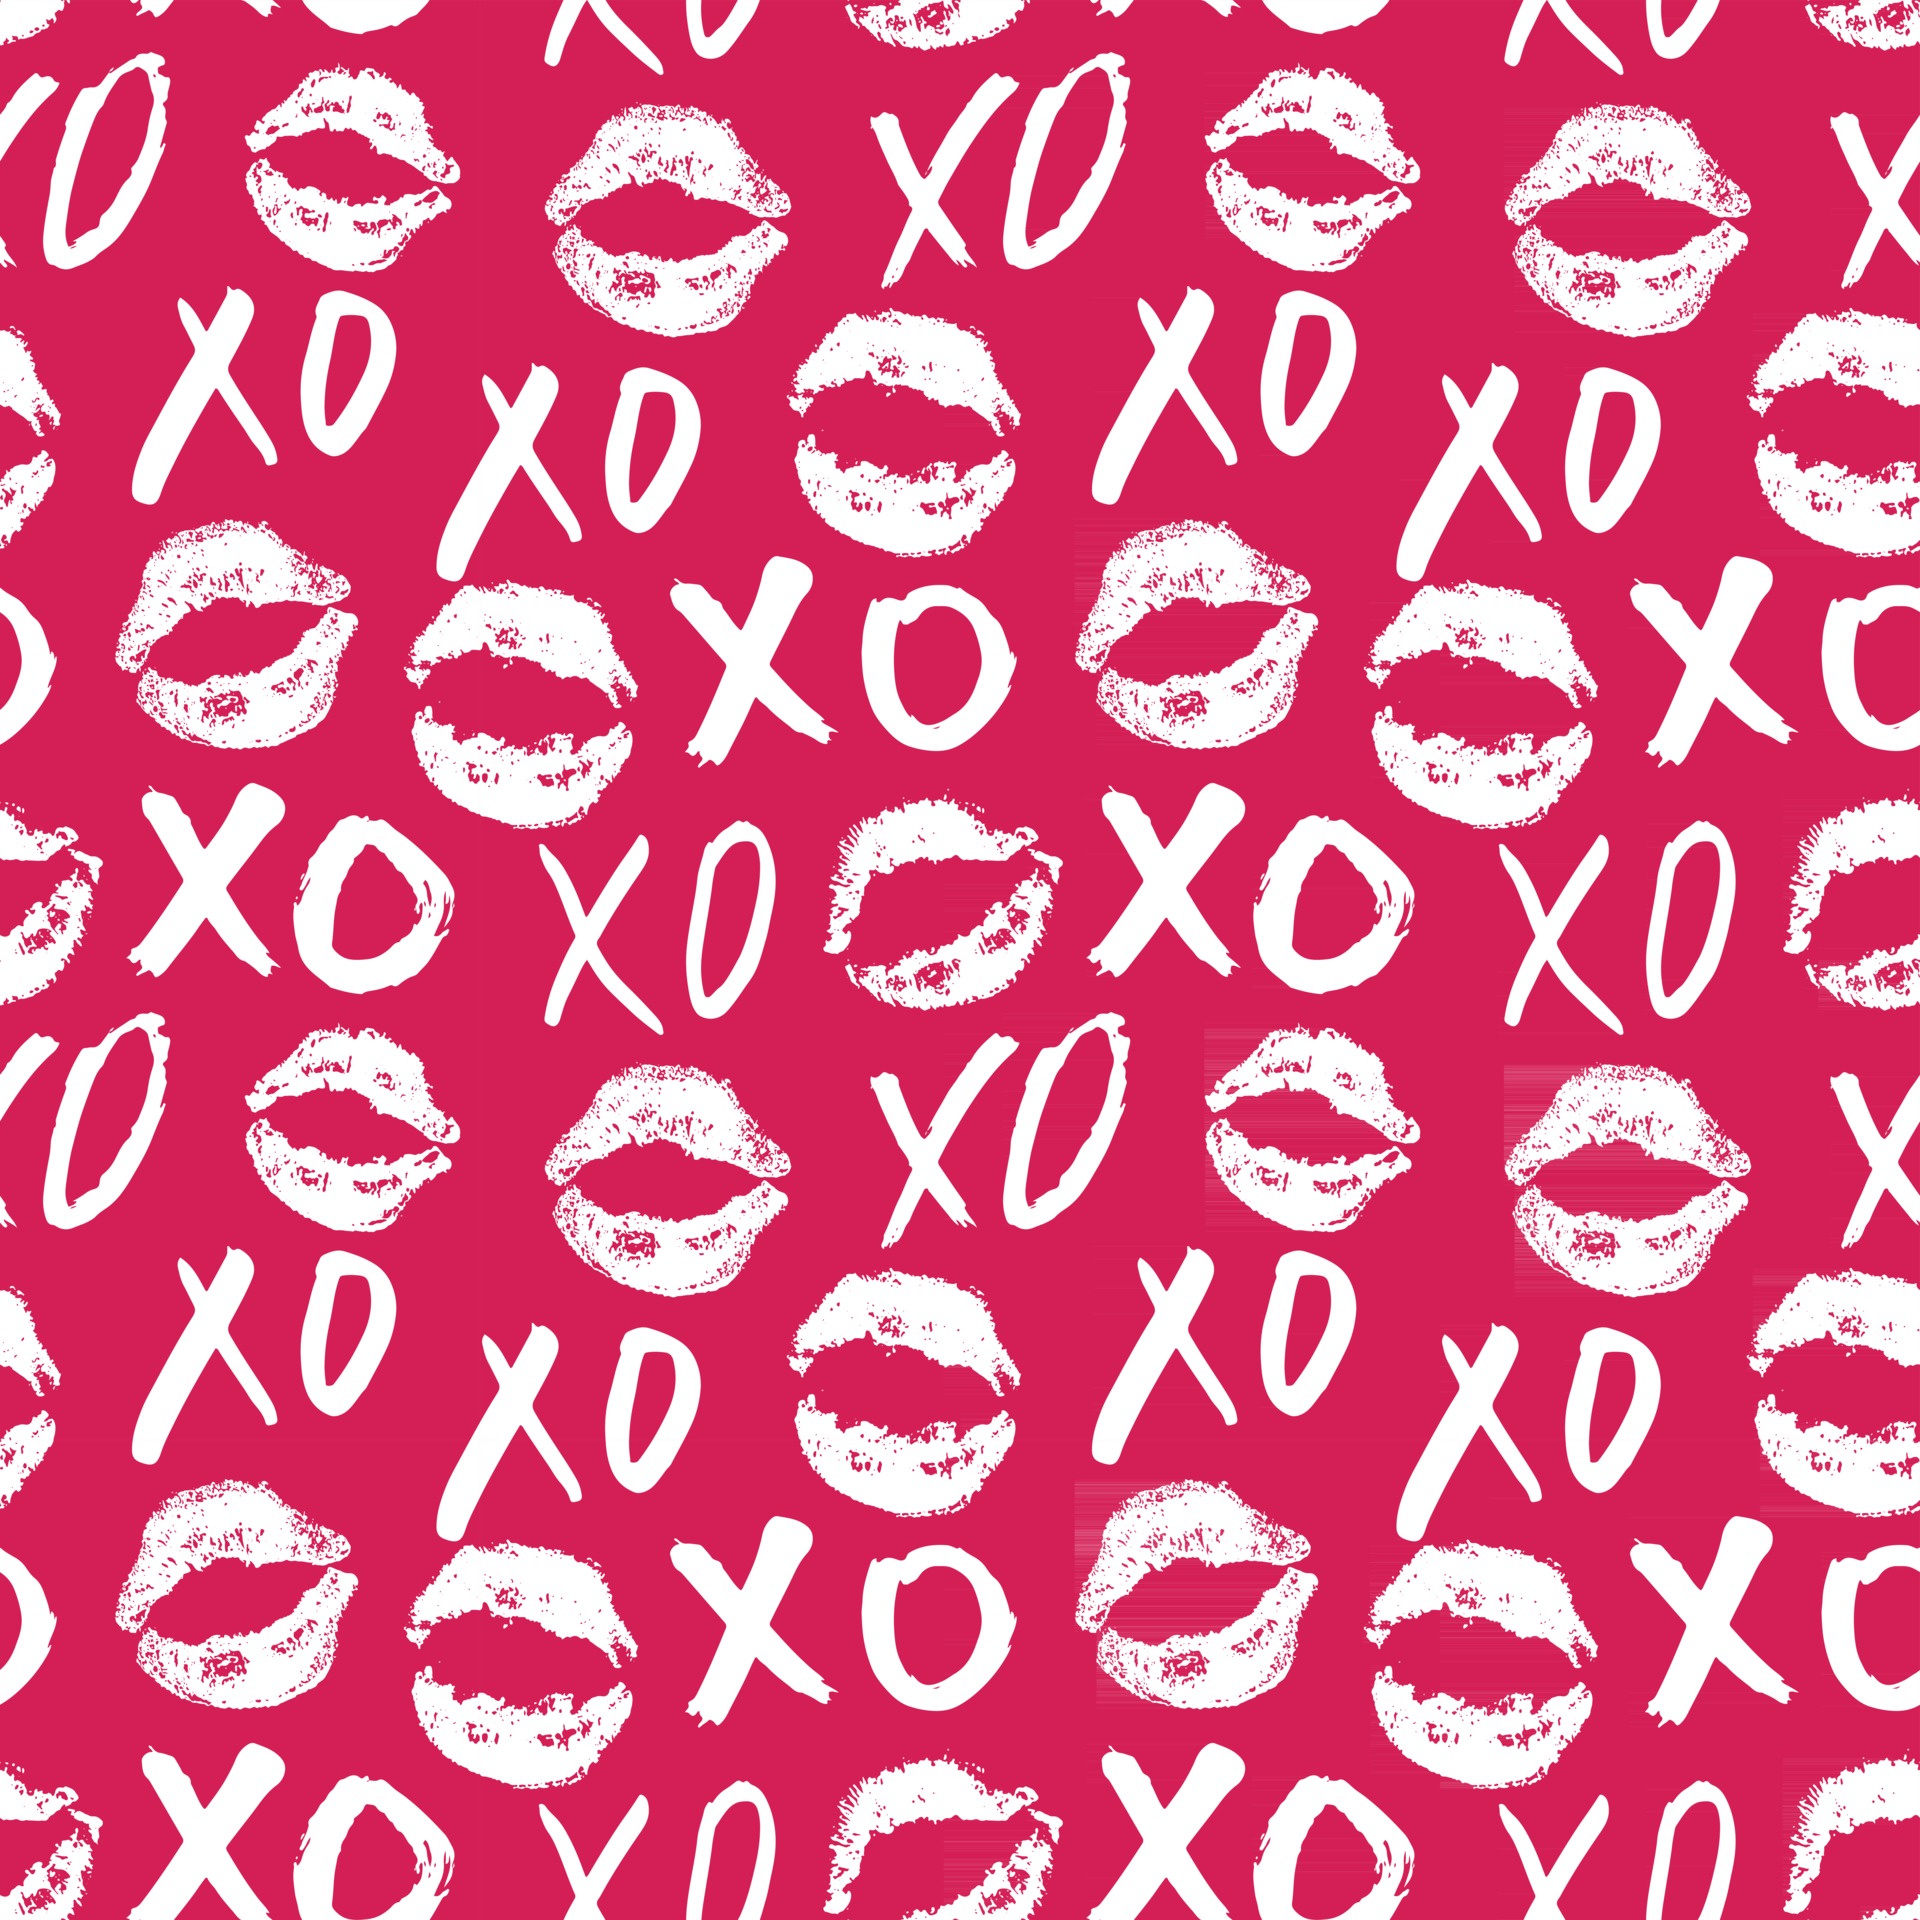 https://static.vecteezy.com/system/resources/previews/002/653/764/original/xoxo-brush-lettering-signs-seamless-pattern-grunge-calligraphic-hugs-and-kisses-phrase-internet-slang-abbreviation-xoxo-symbols-illustration-isolated-on-white-background-vector.jpg